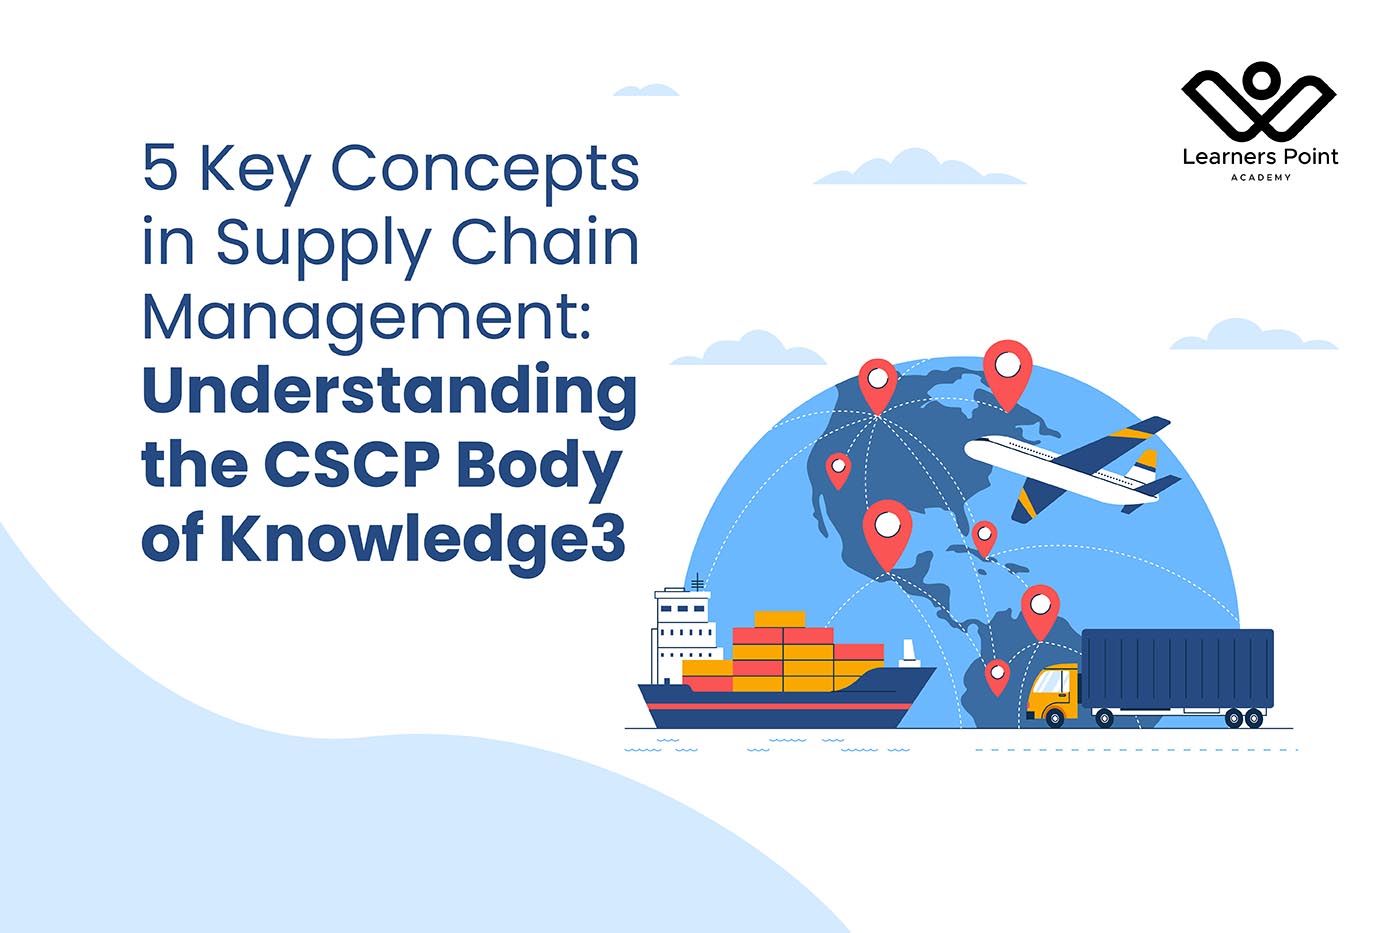 5 Key Concepts in Supply Chain Management: Understanding the CSCP Body of Knowledge3